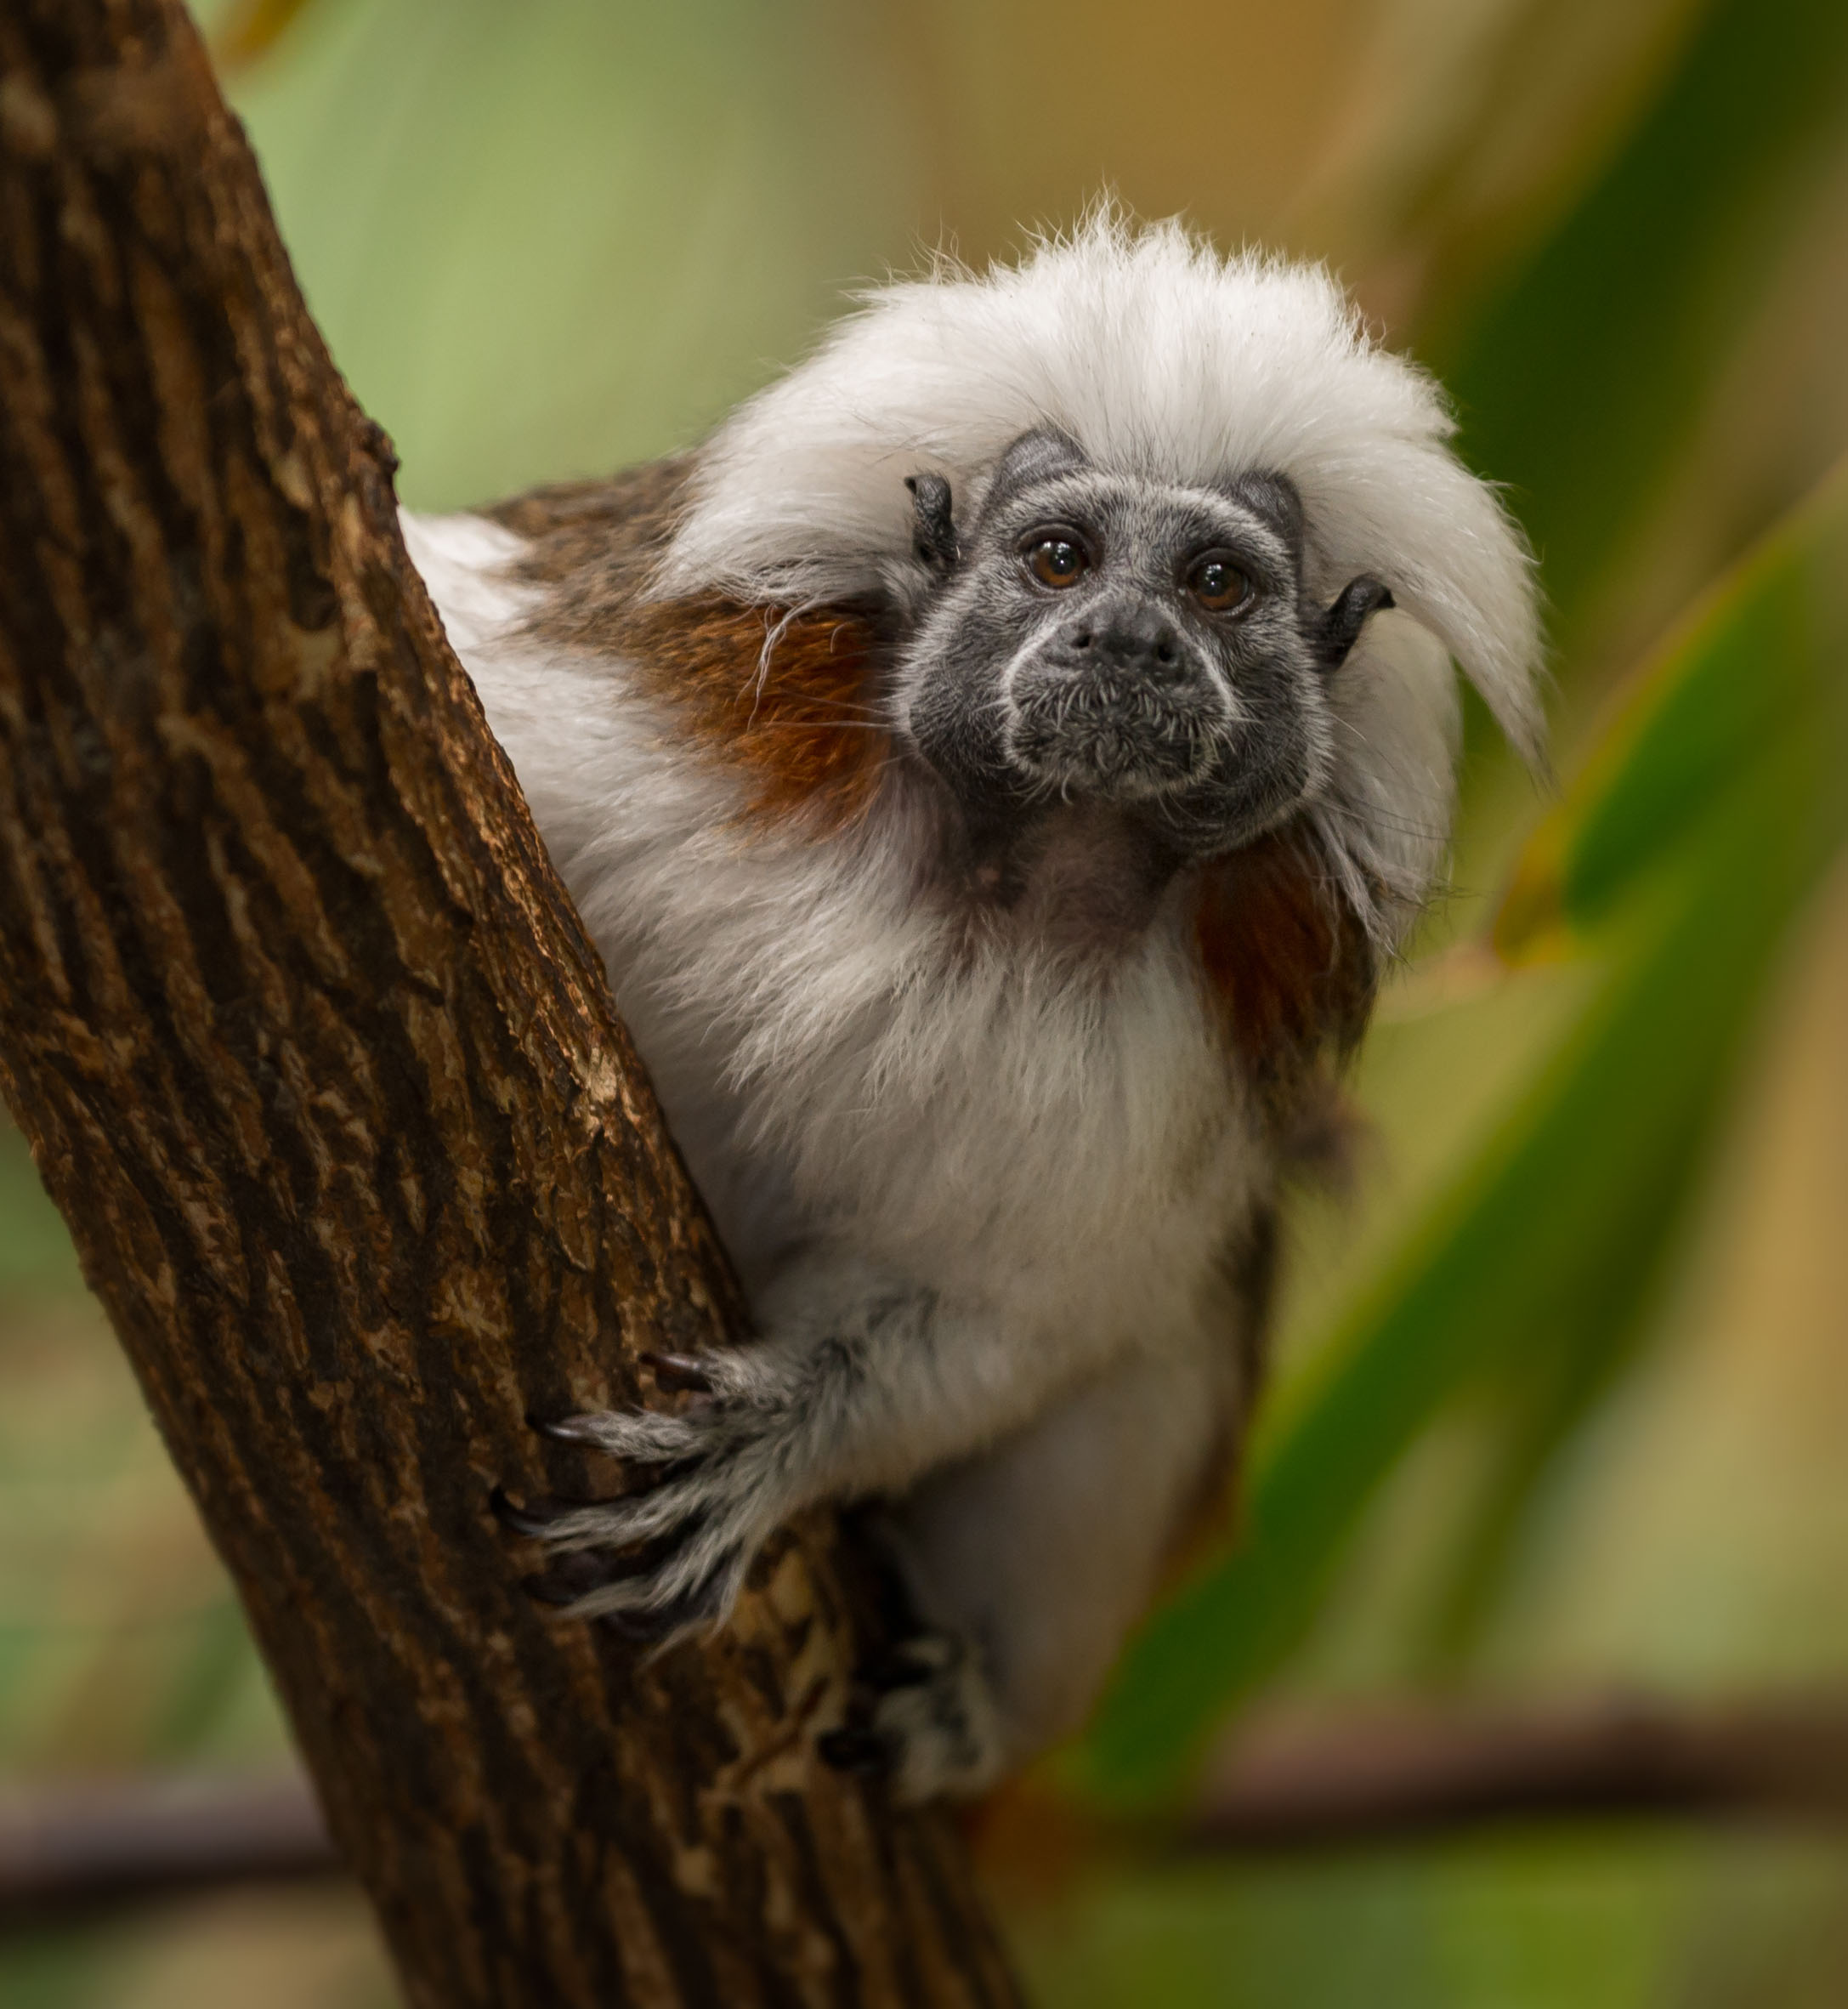 A cotton-top tamarin peers out from under his striking shock of white hair.